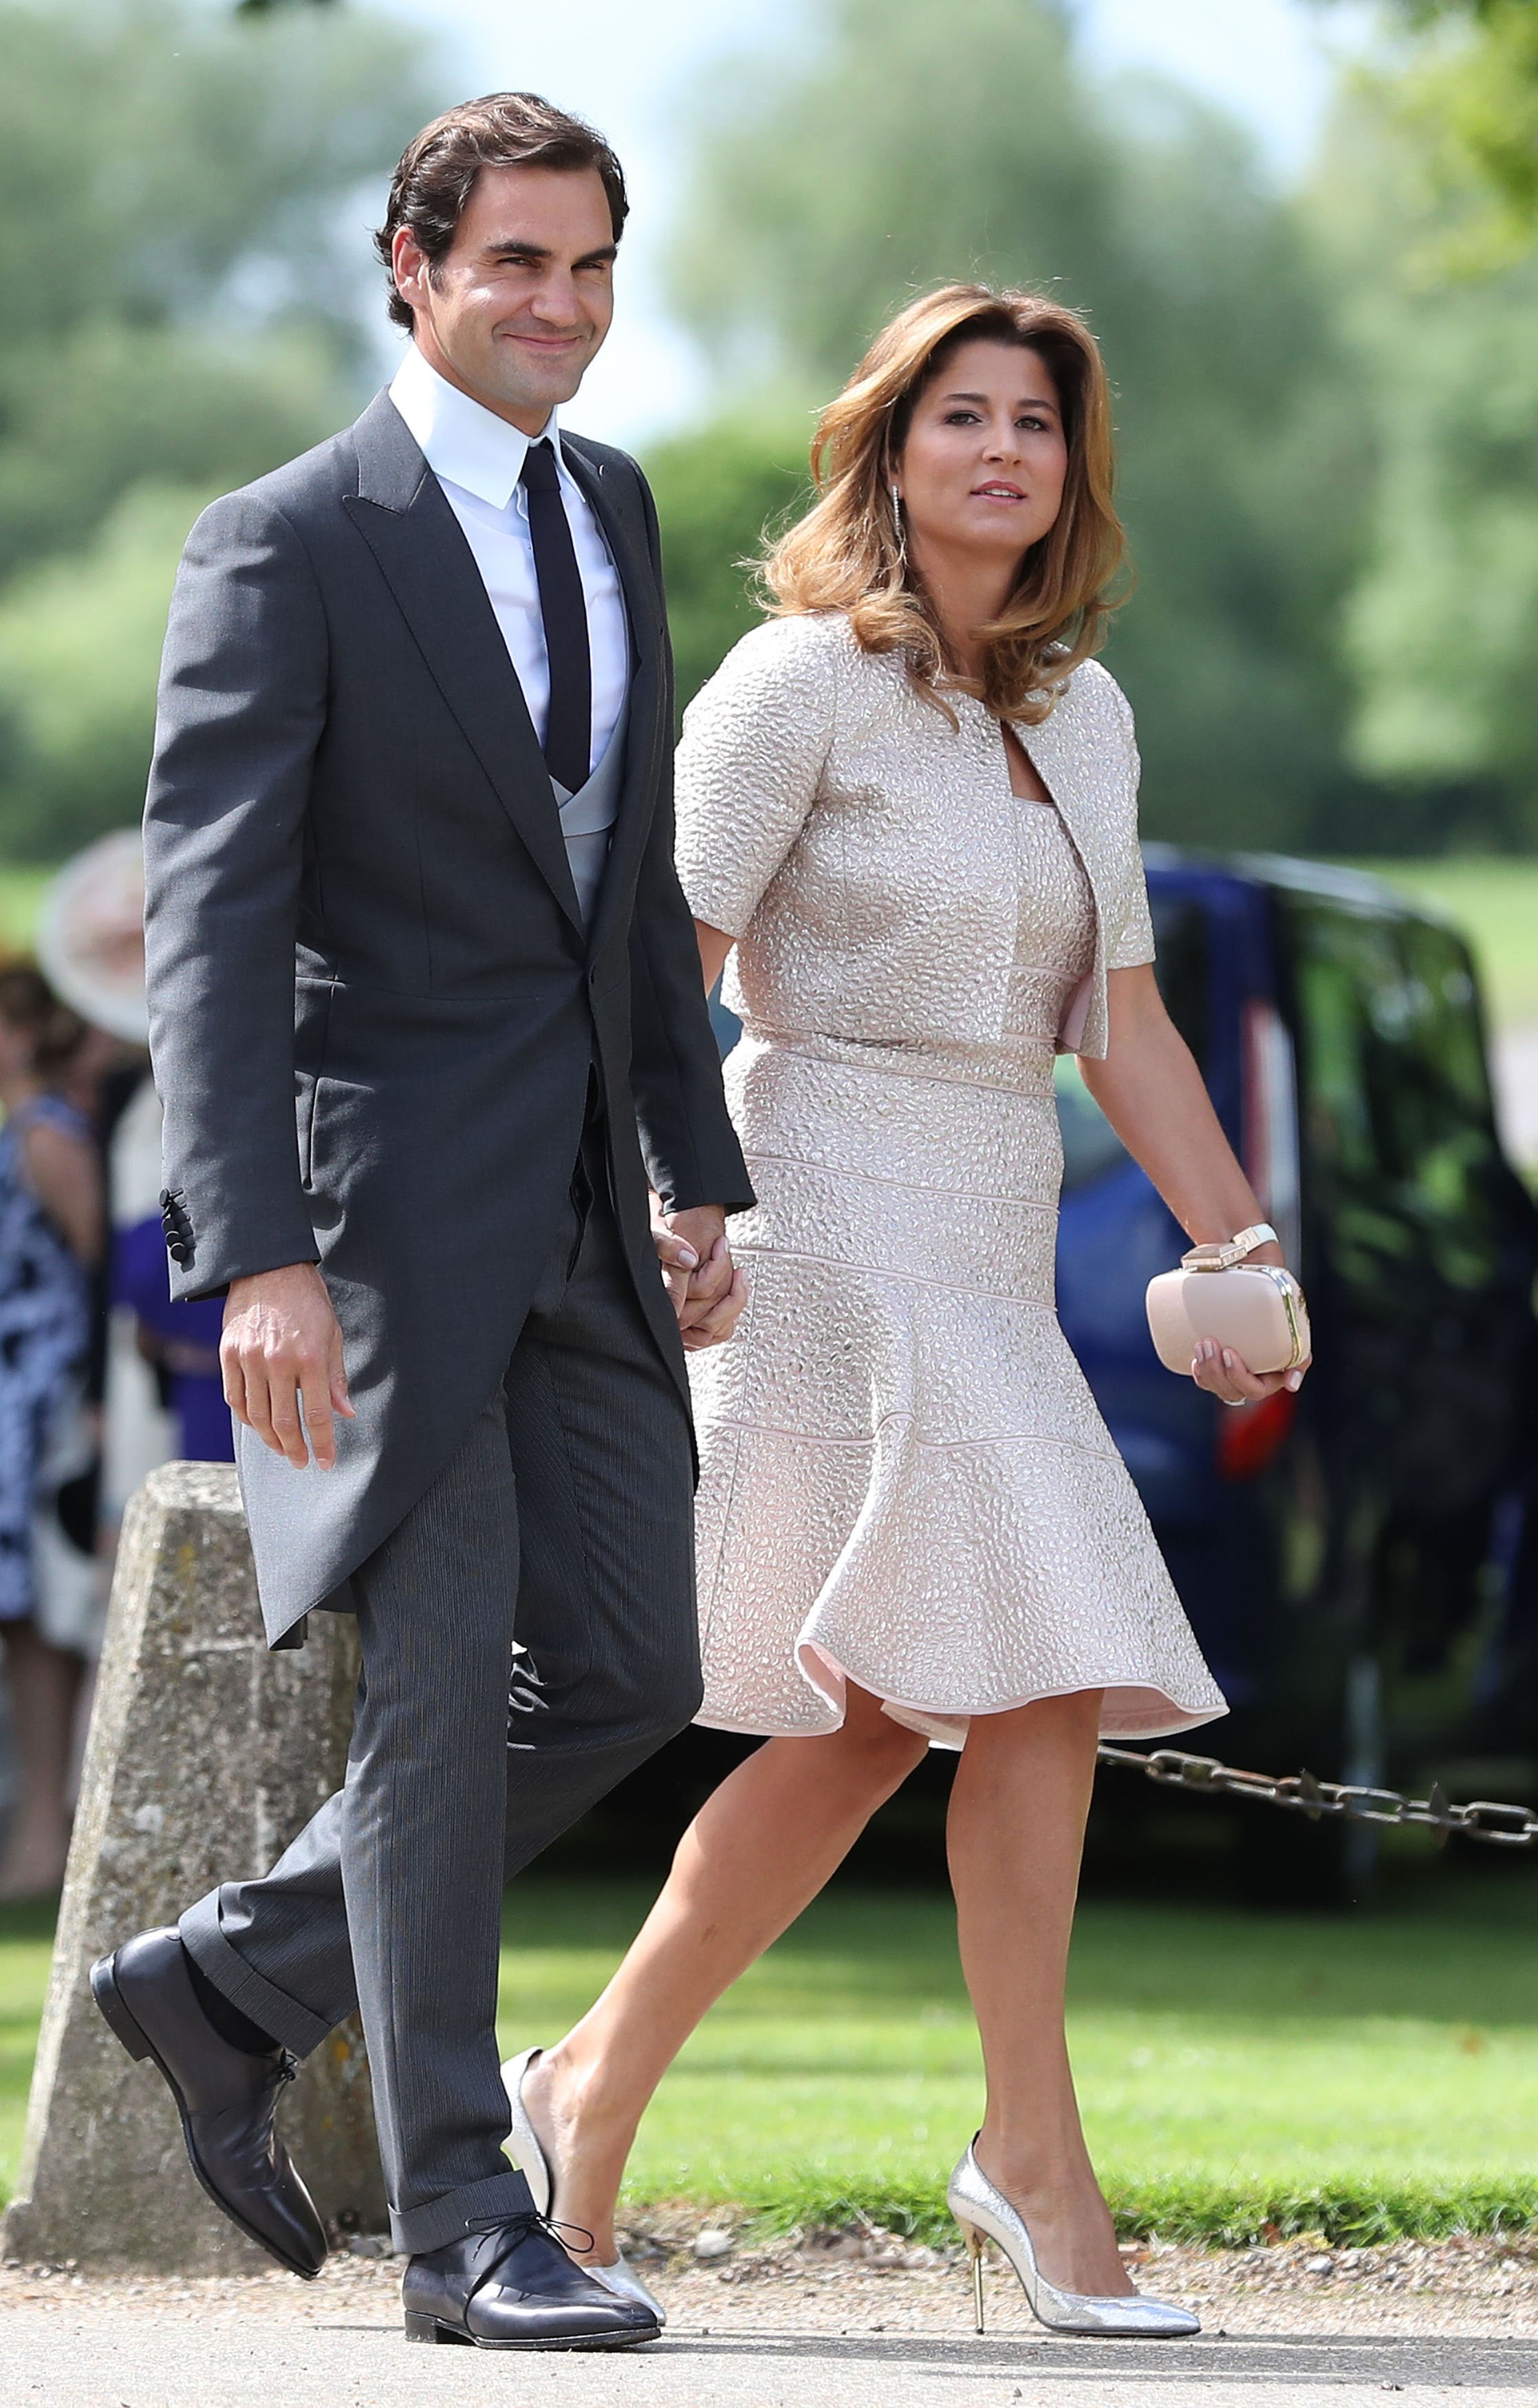 Roger Federer and his wife Mirka arrive ahead of the wedding of the Duchess of Cambridge's sister Pippa Middleton at St. Mark's church in Englefield, Berkshire. | Source: Getty Images